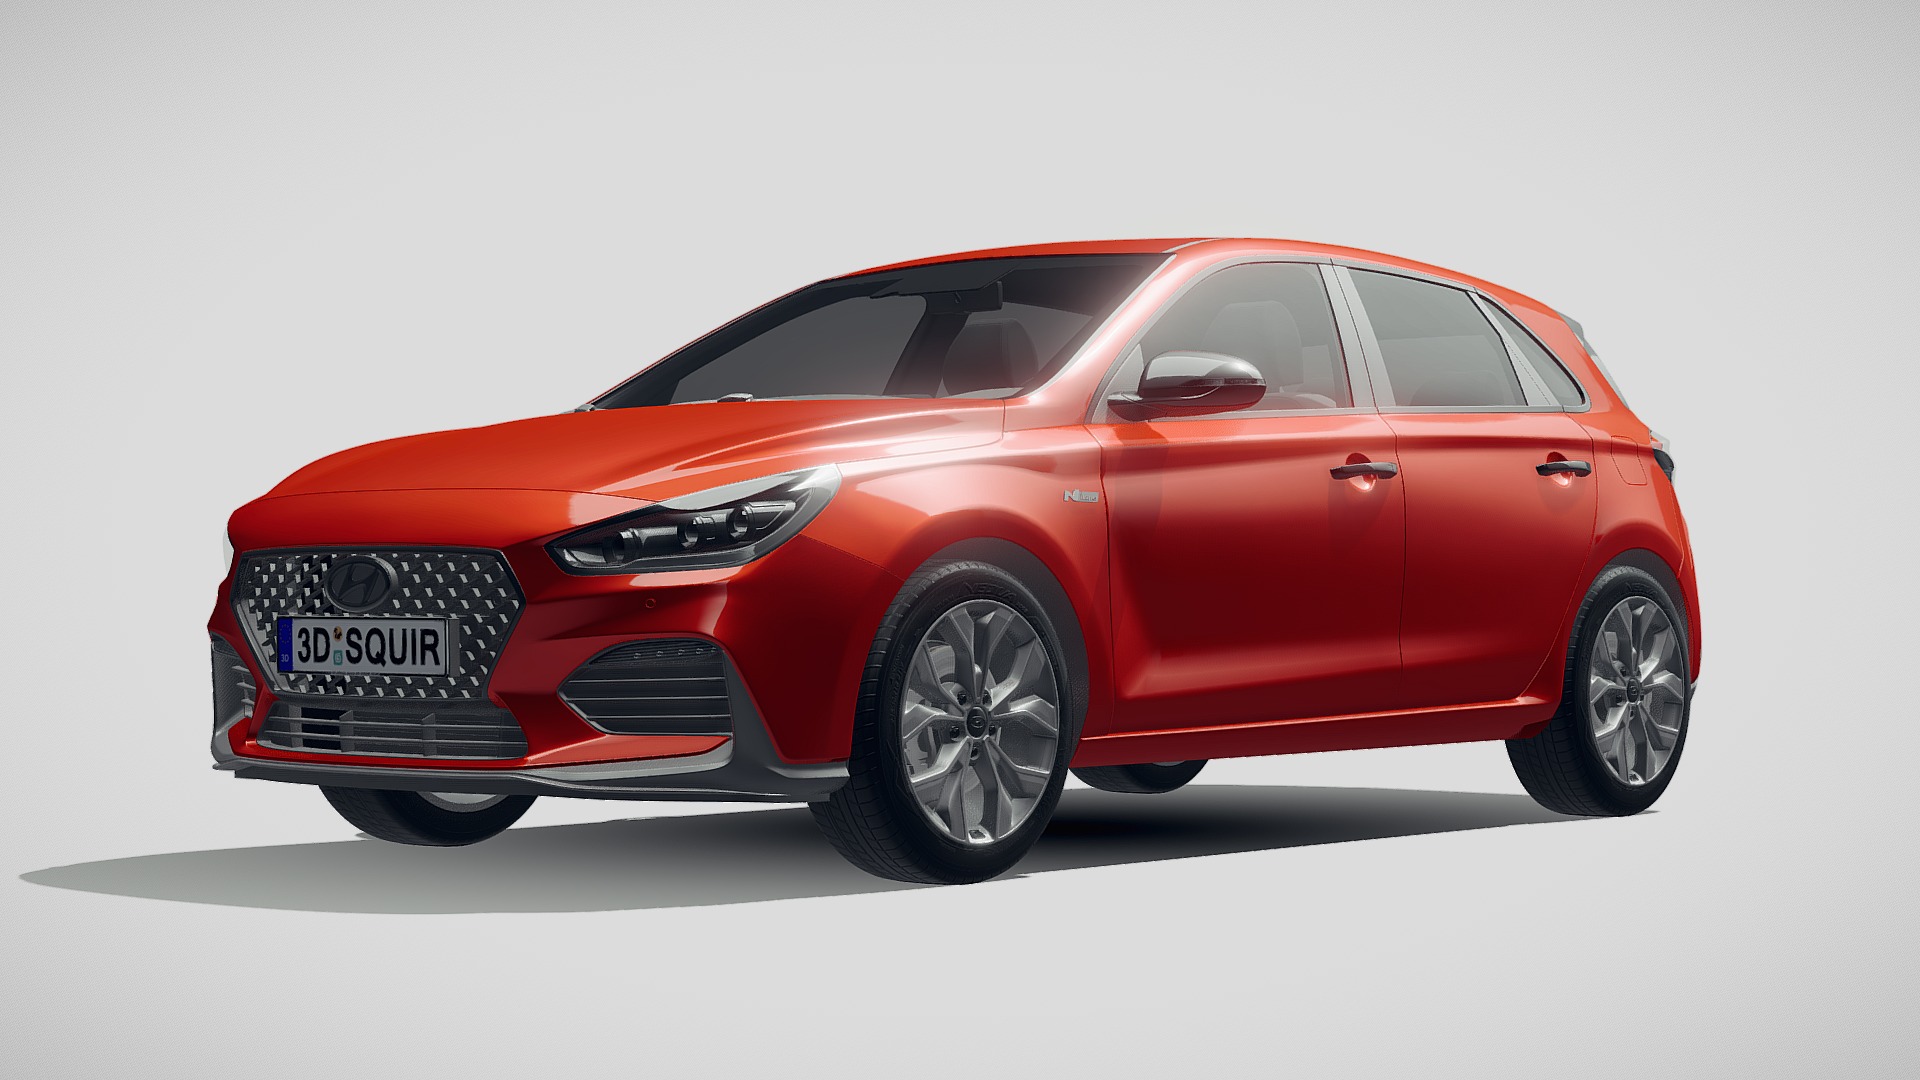 3D model Hyundai i30 N-line 2019 - This is a 3D model of the Hyundai i30 N-line 2019. The 3D model is about a red car with a white background.